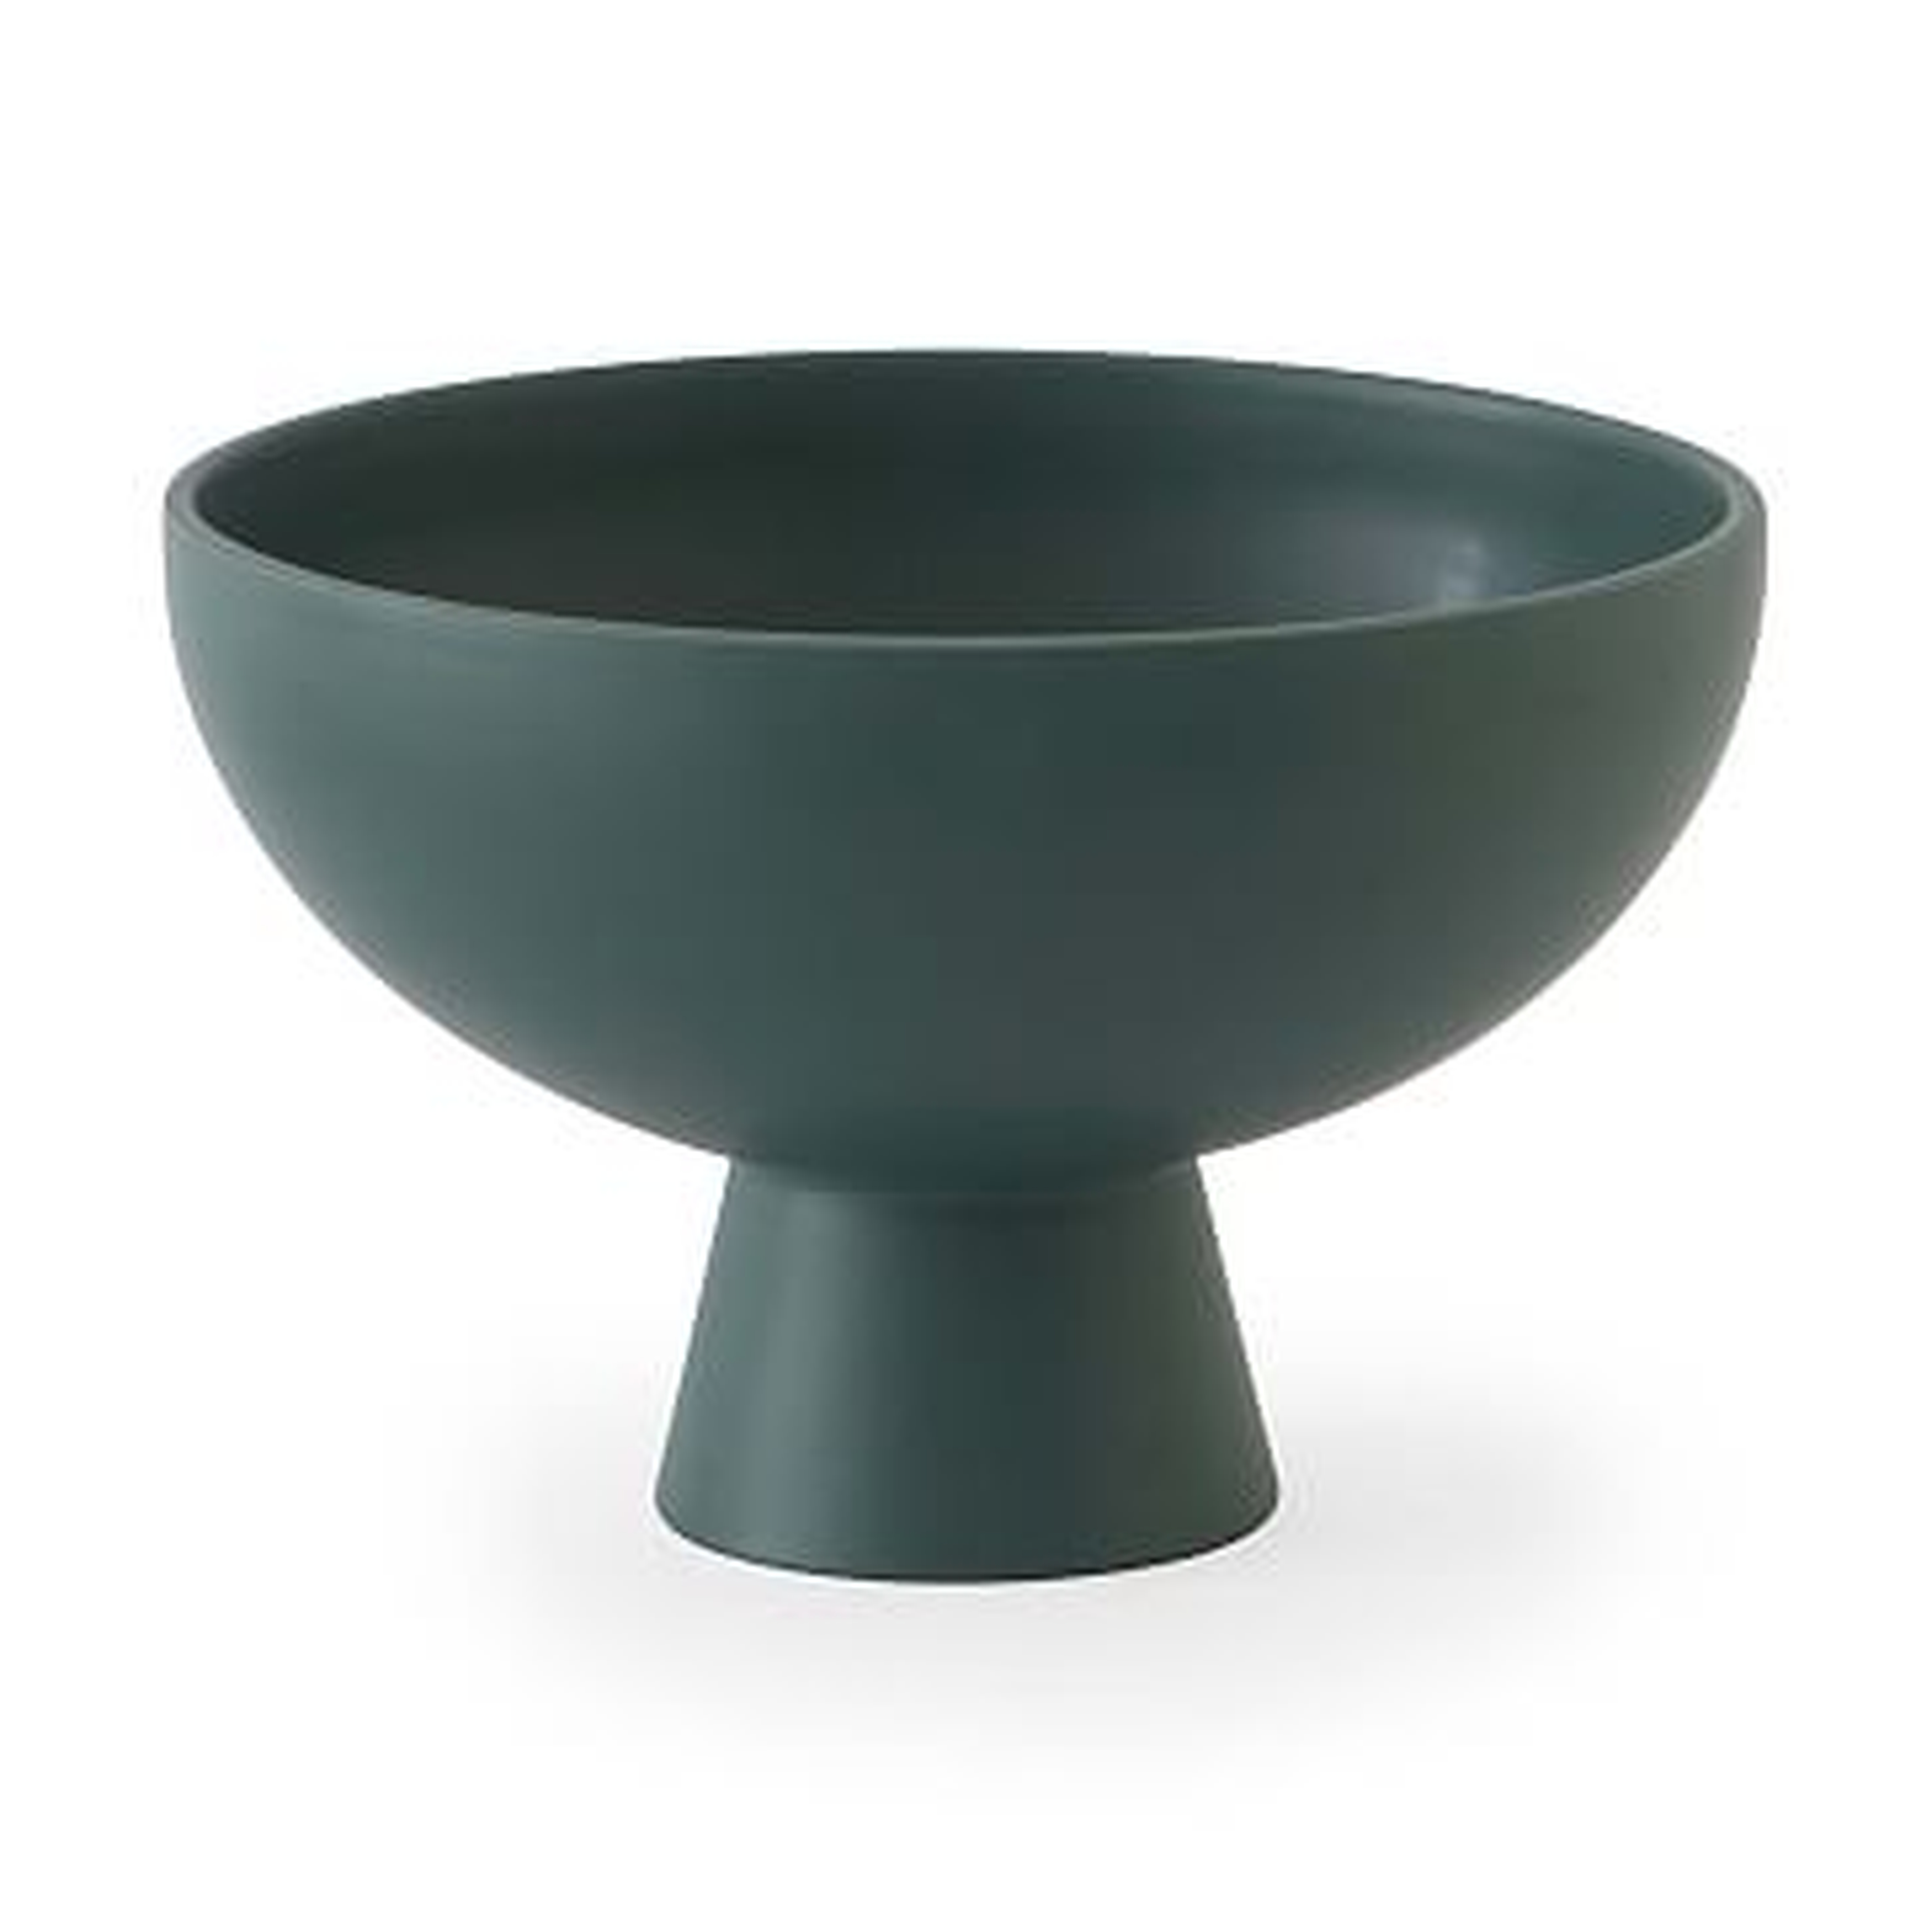 MoMA Collection Raawii Strom Bowl Large, Ceramic, Green Gables - West Elm